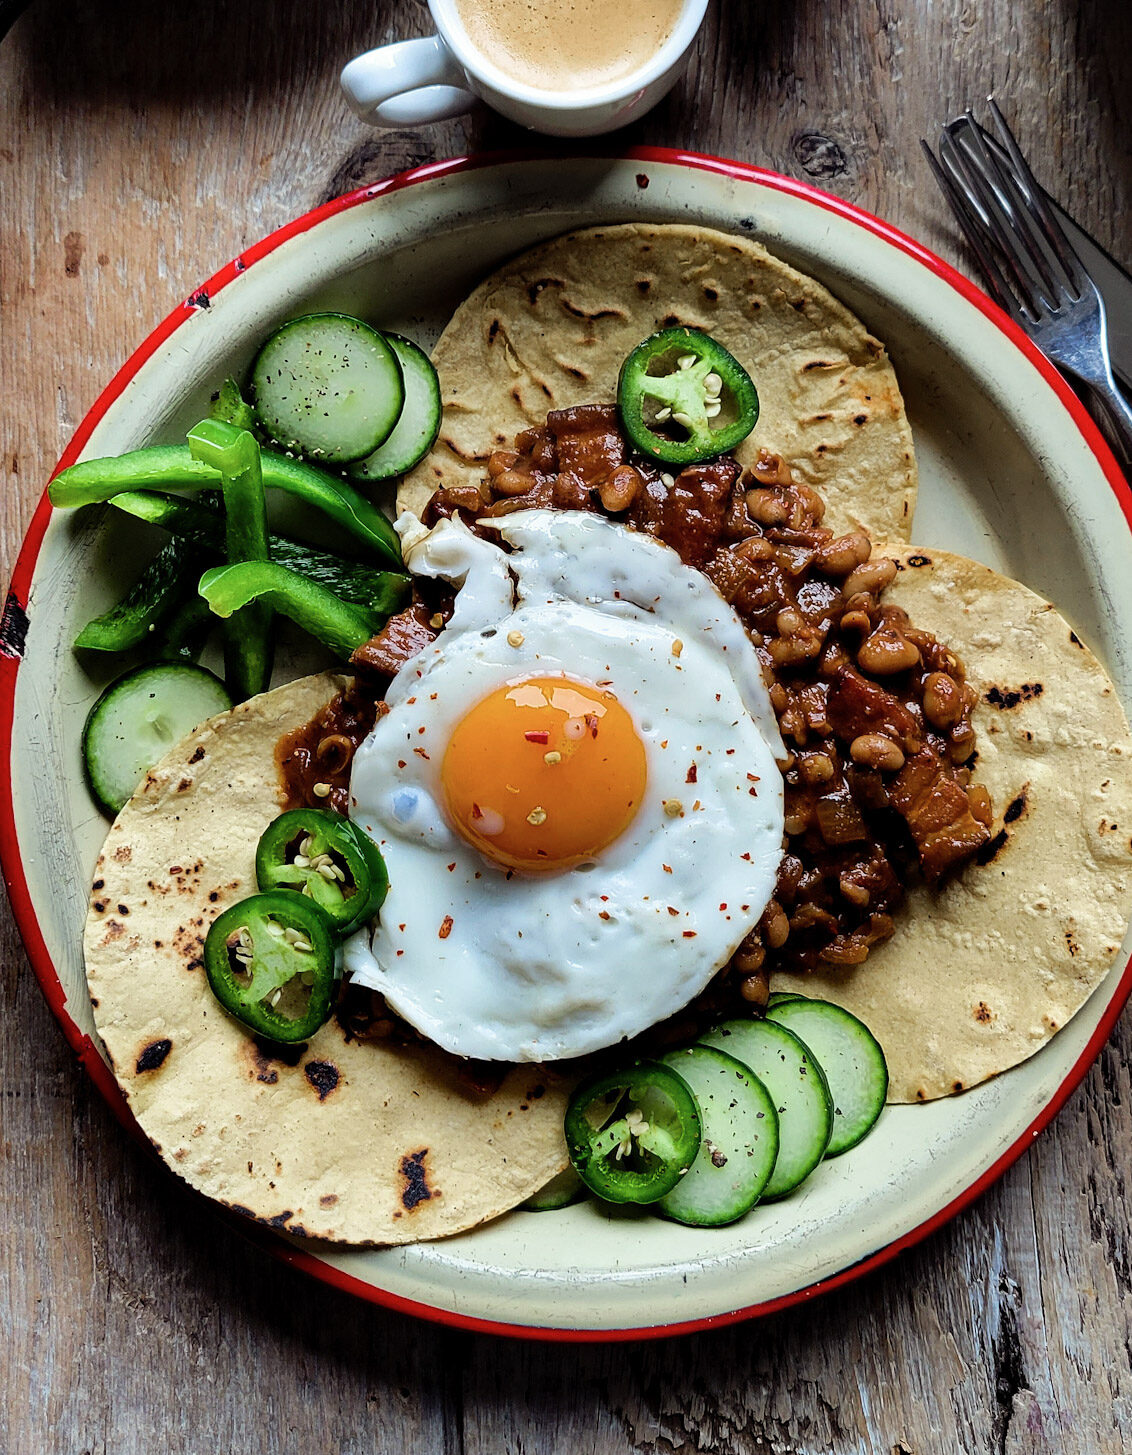 A plate with tortillas, baked beans and a fried egg are ready to eat for breakfast.